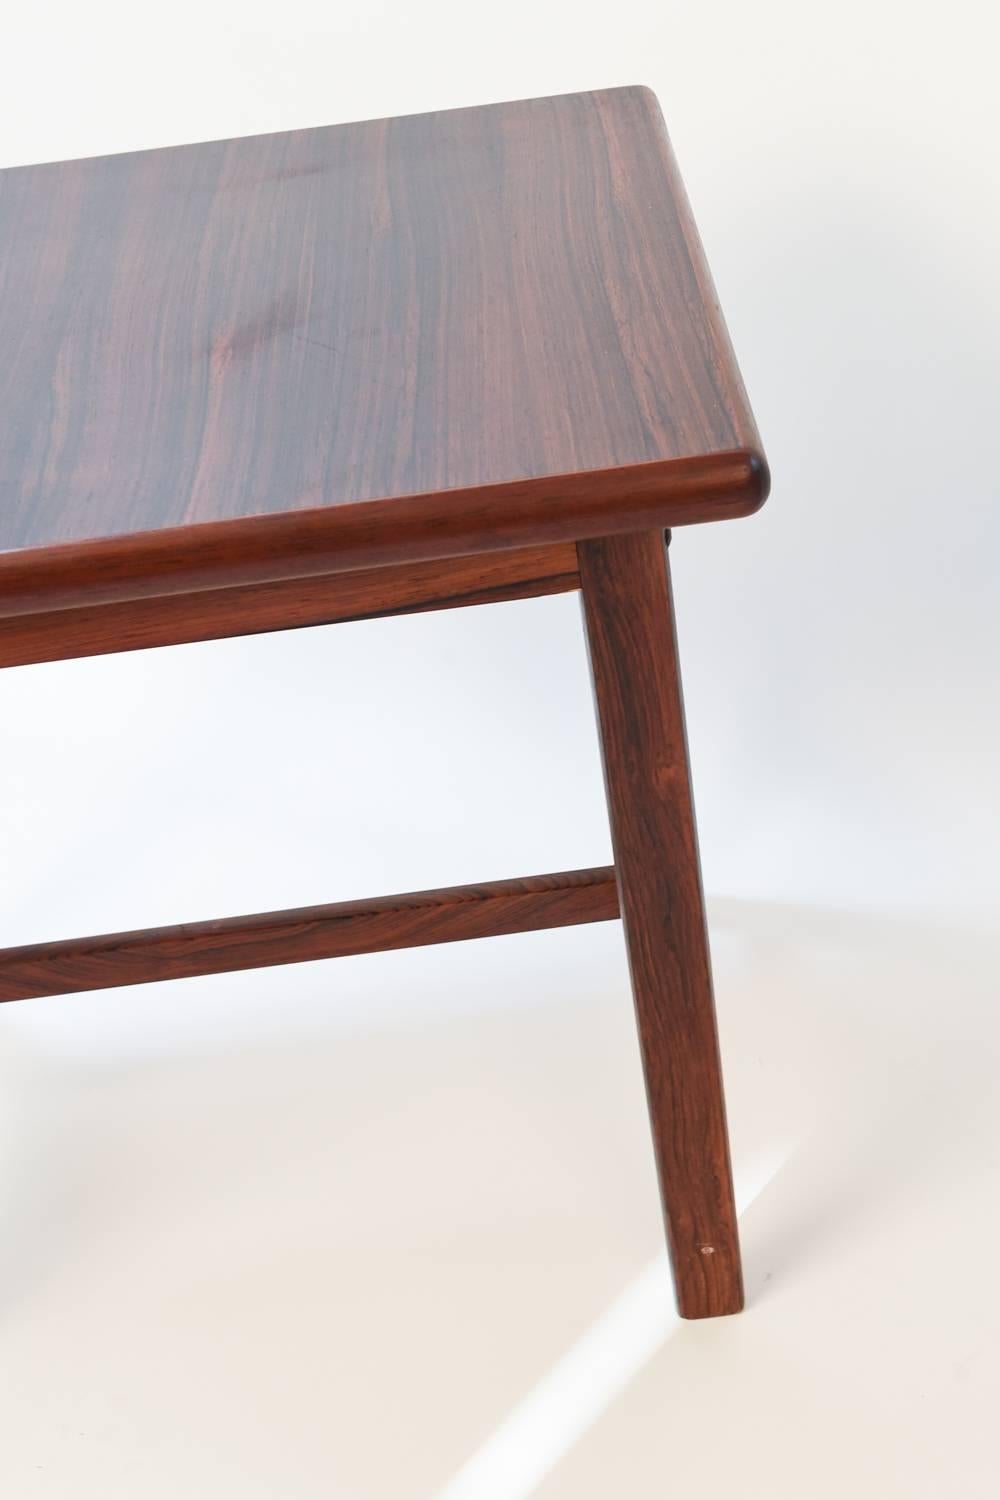 20th Century Pair of Danish Midcentury Rosewood Side Tables